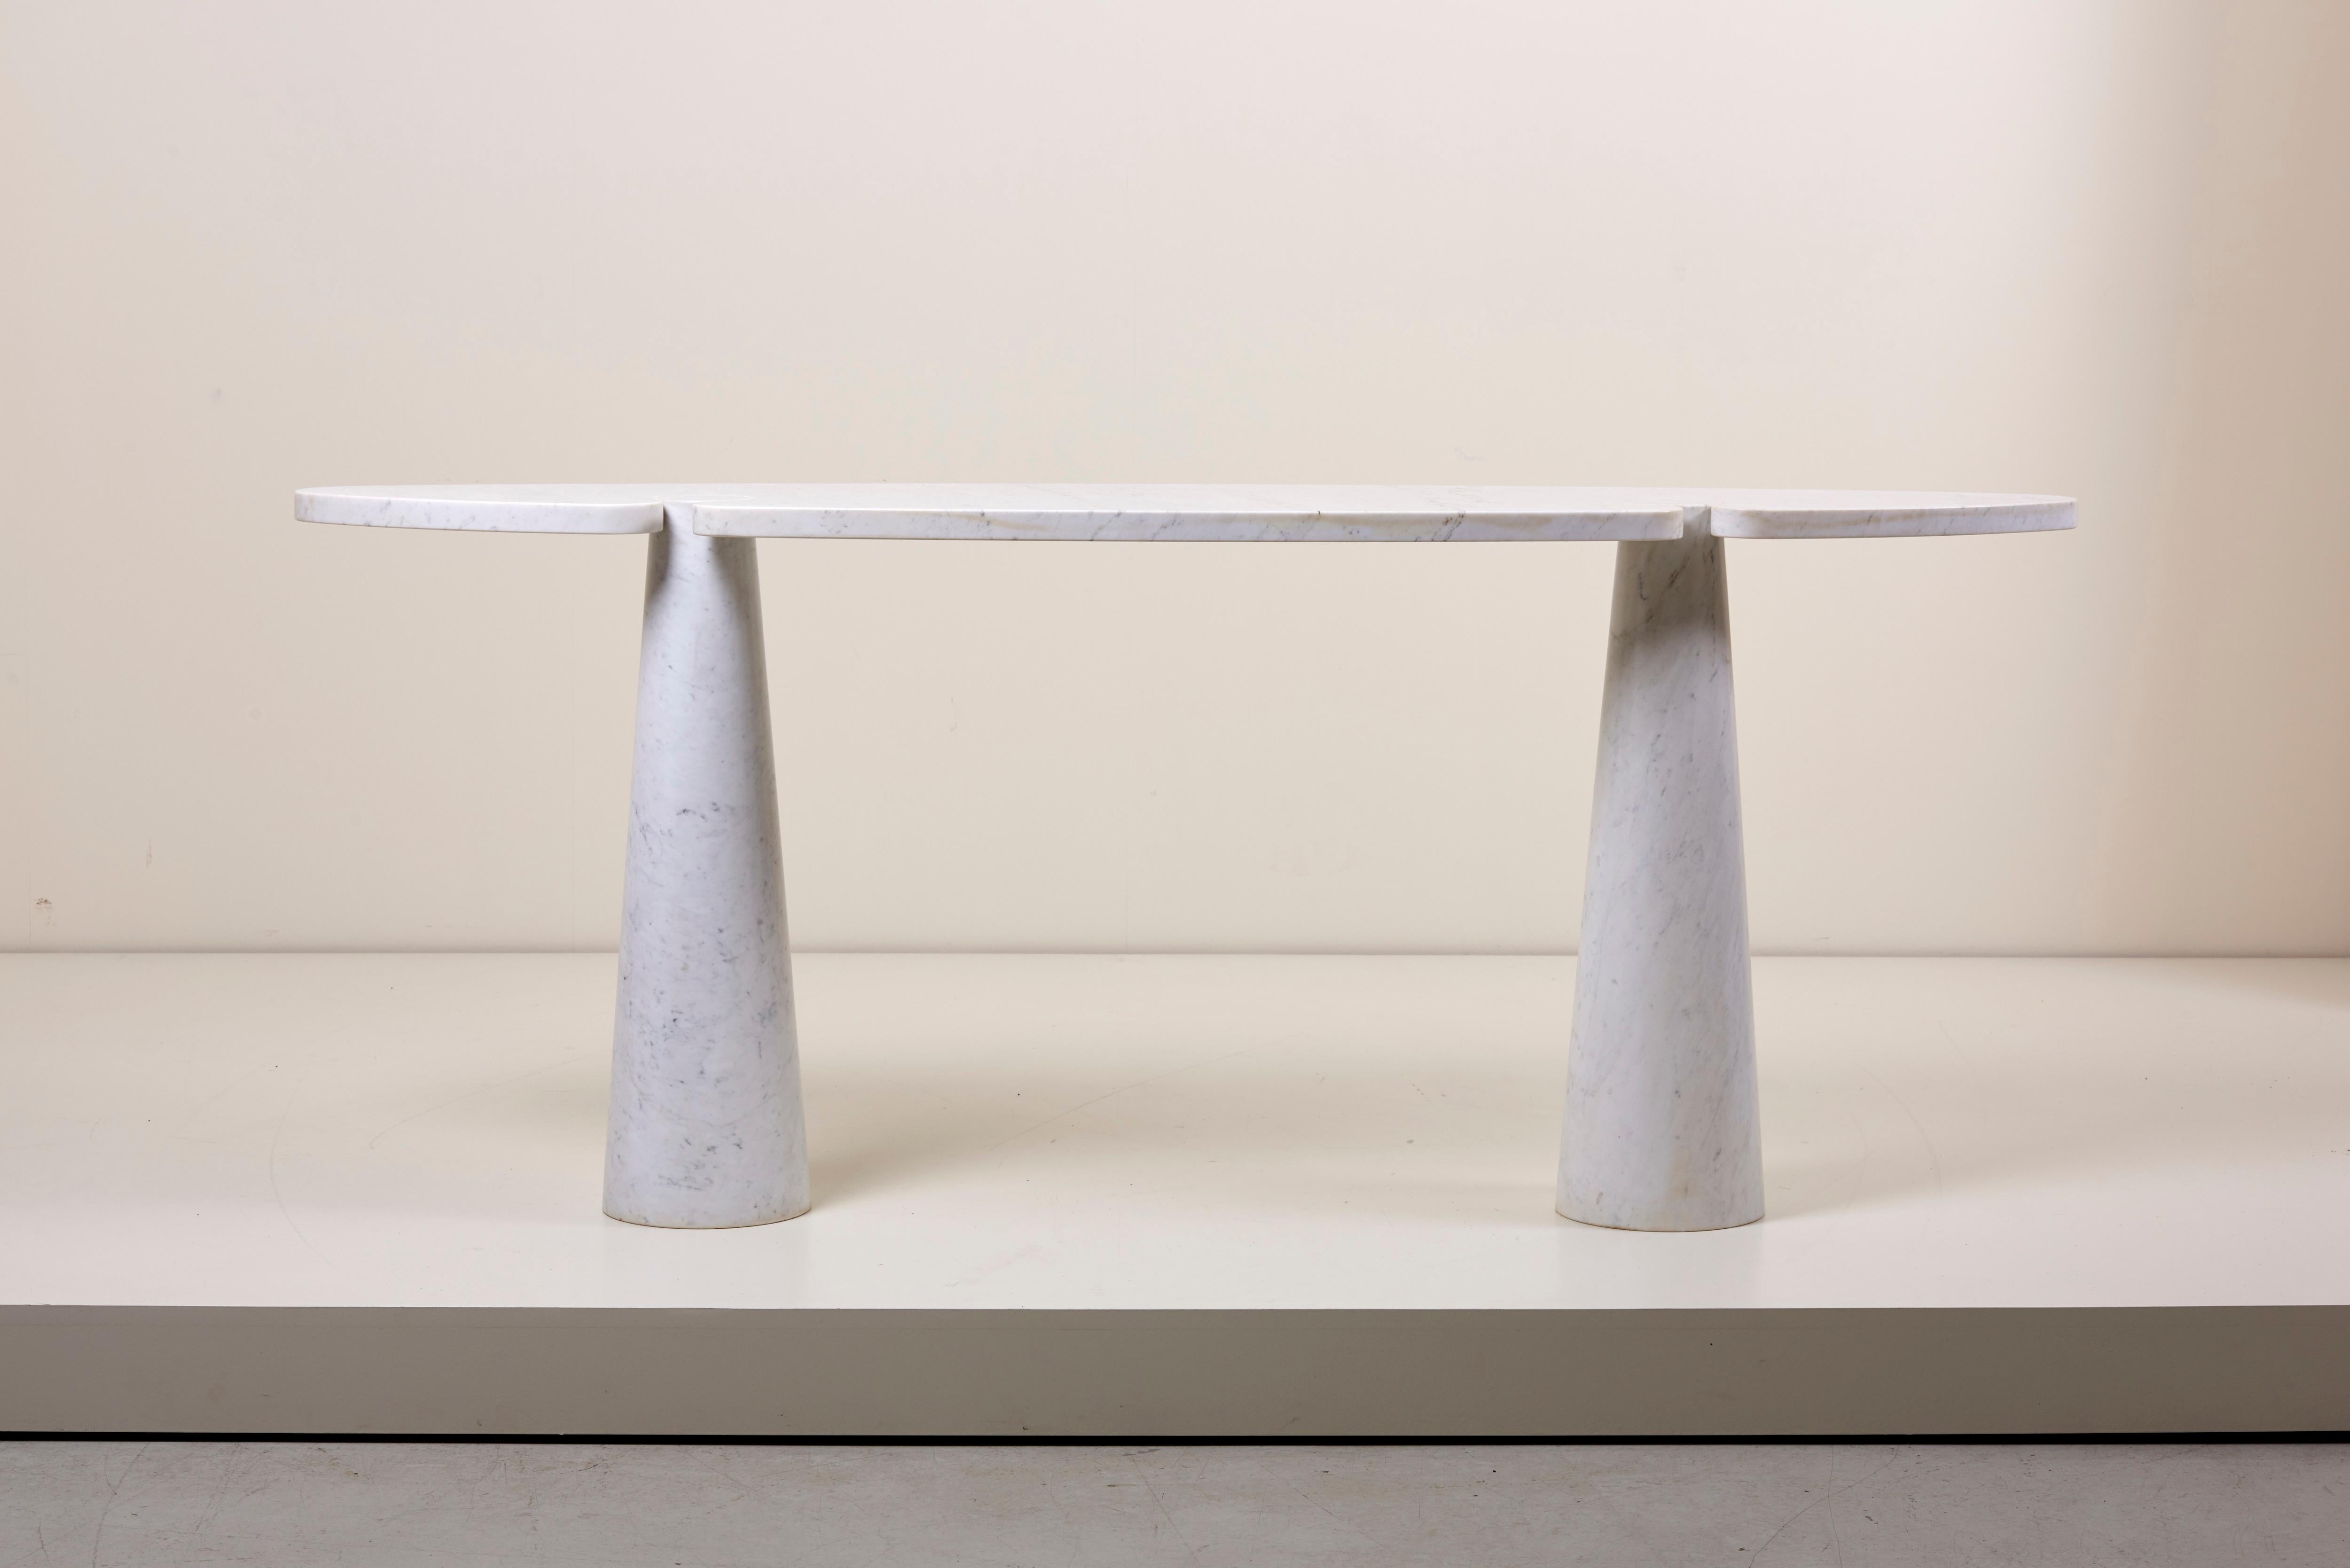 Rare Angelo Mangiarotti Eros console table in white Carrara marble.
The console table is produced by Skipper and is in very good vintage condition.